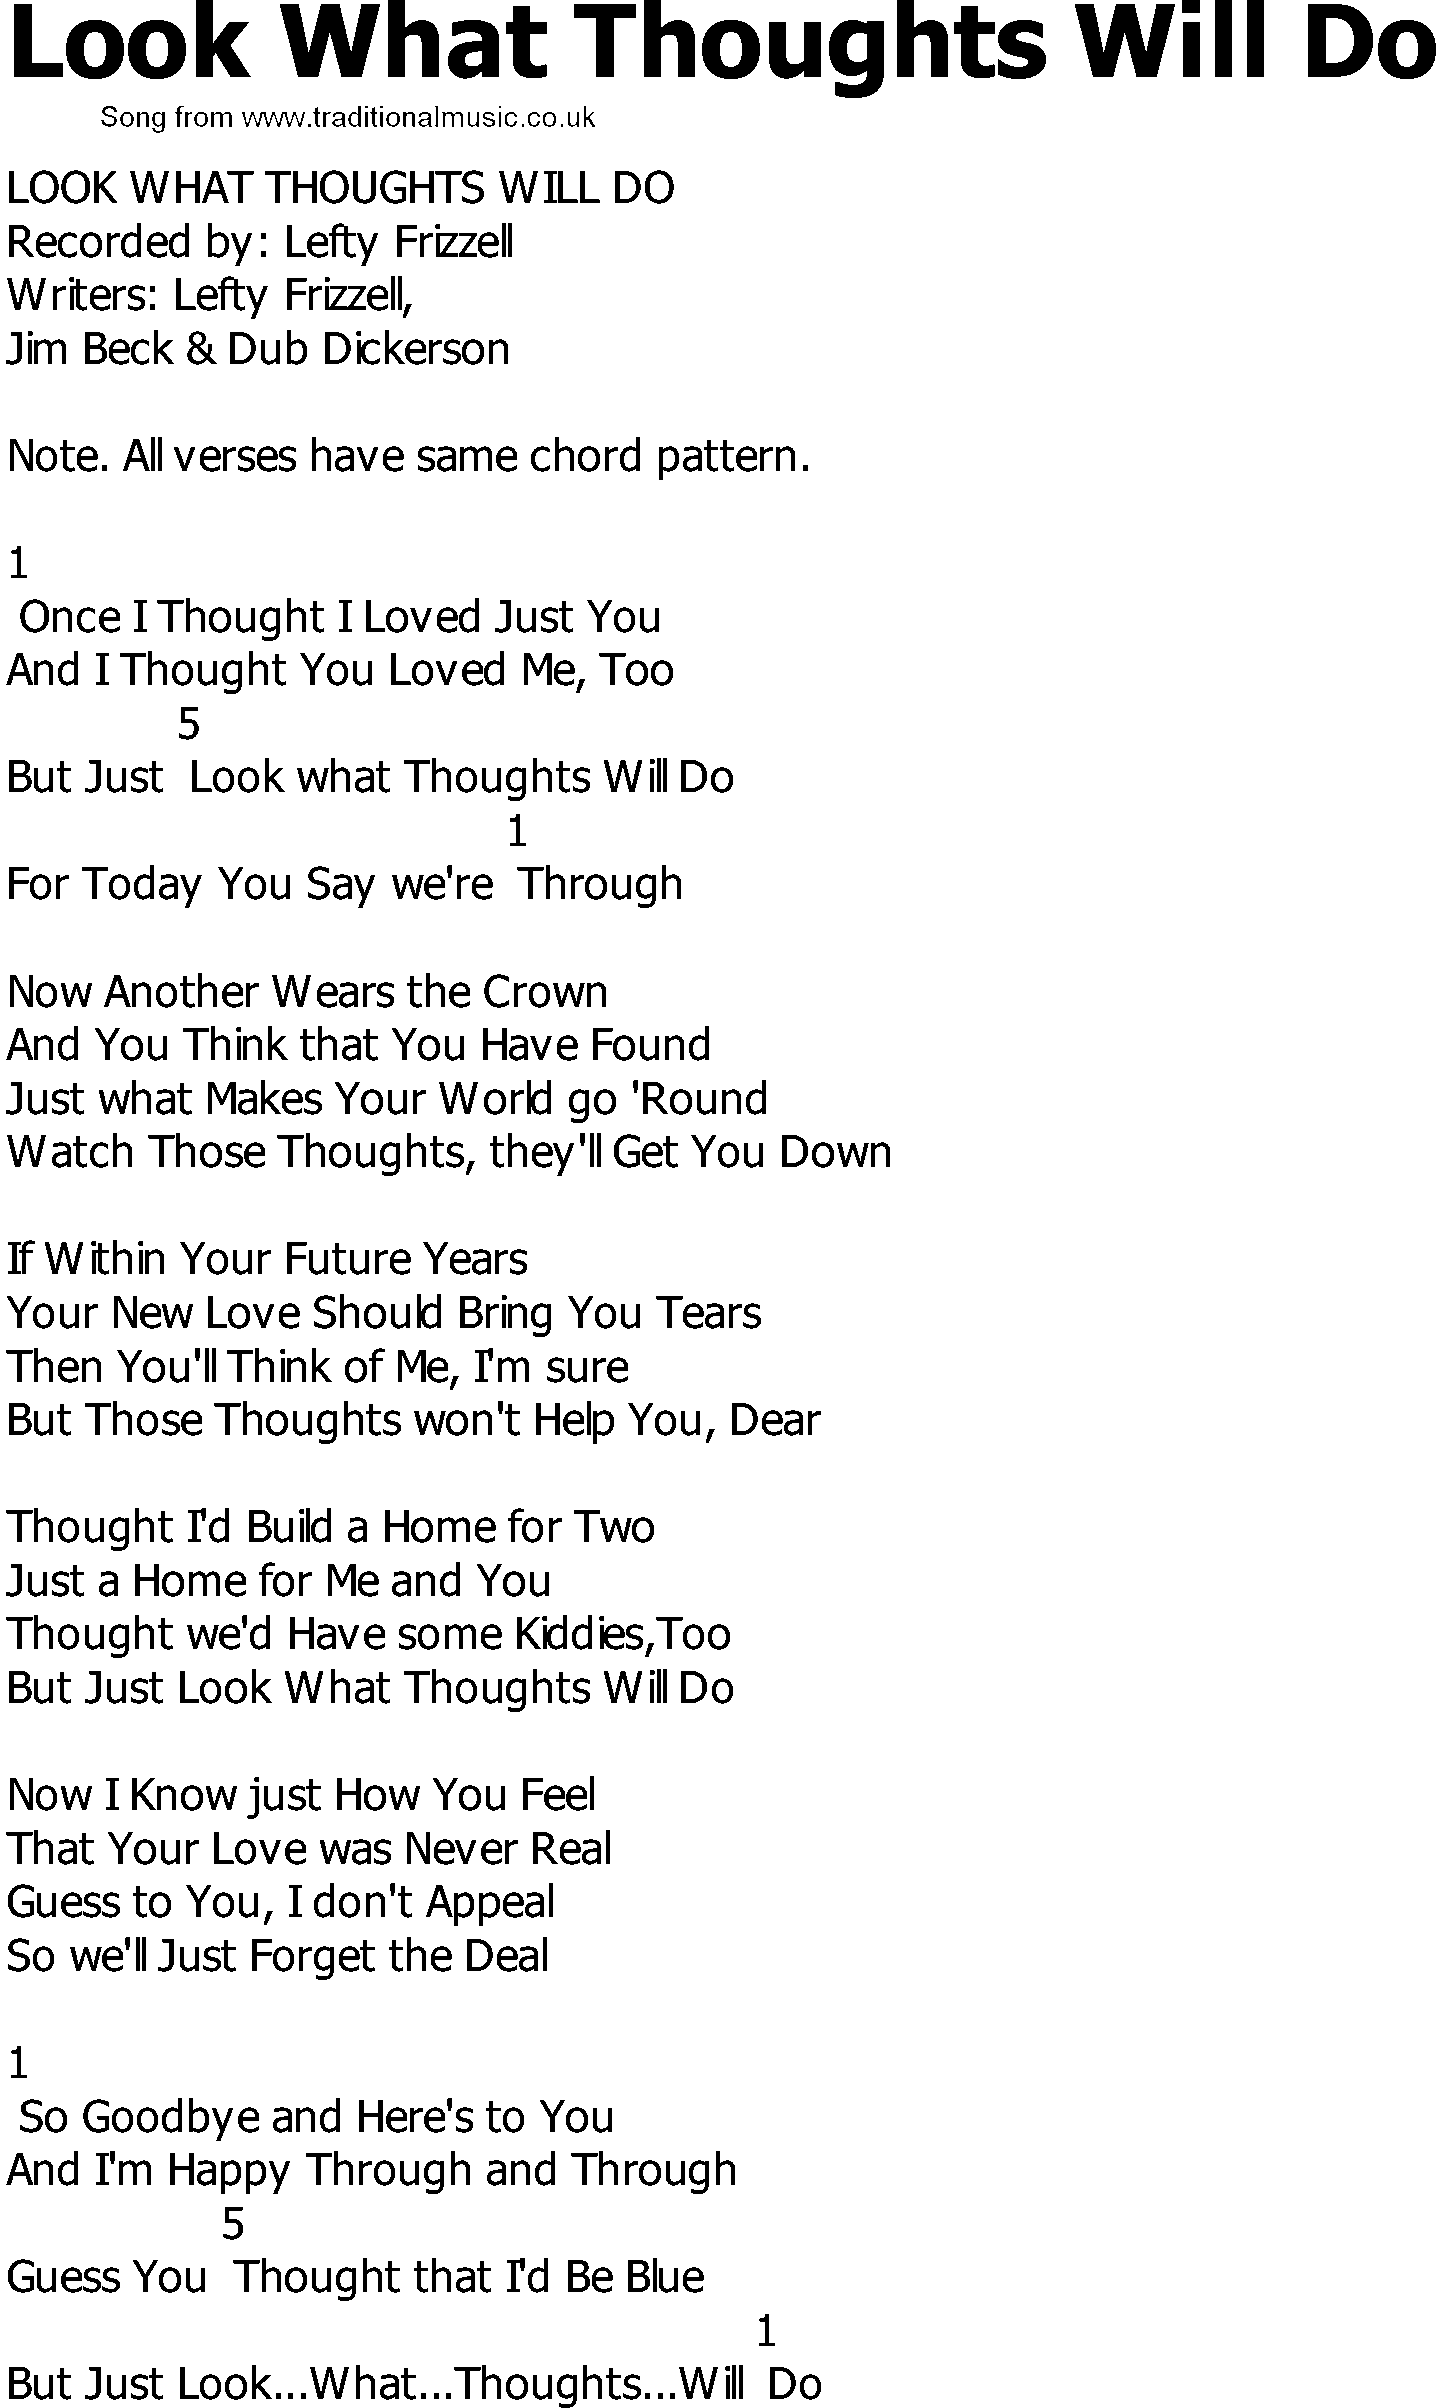 Old Country song lyrics with chords - Look What Thoughts Will Do